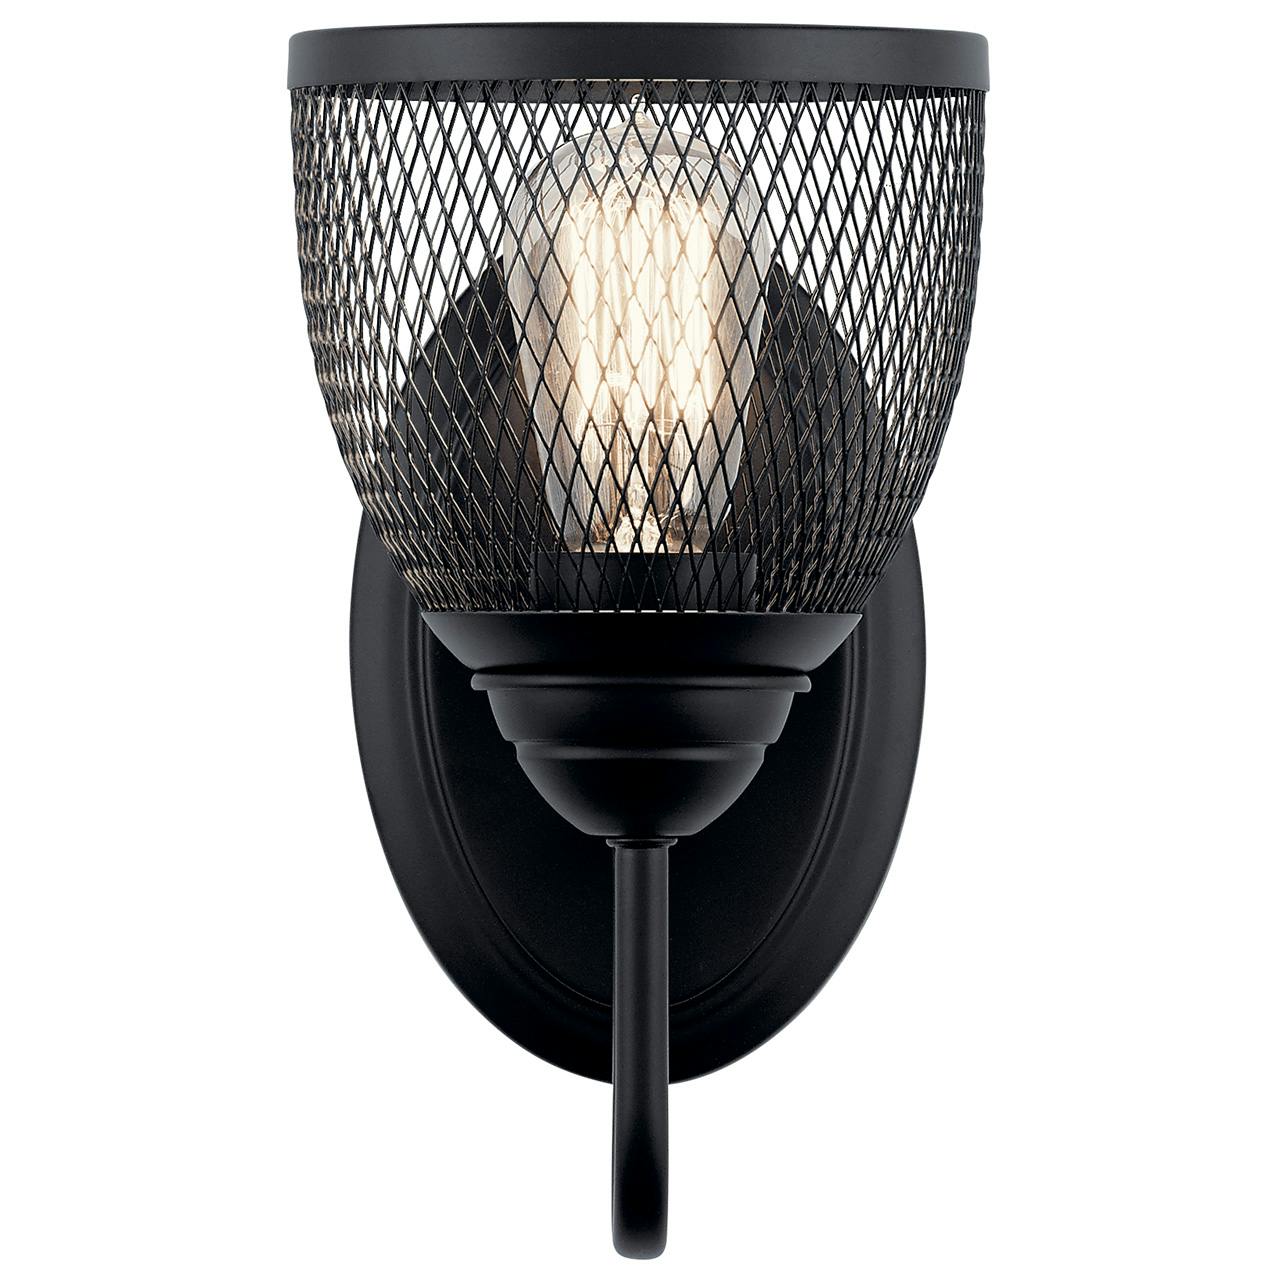 The Voclain™ 1 Light Wall Sconce in Black facing up on a white background